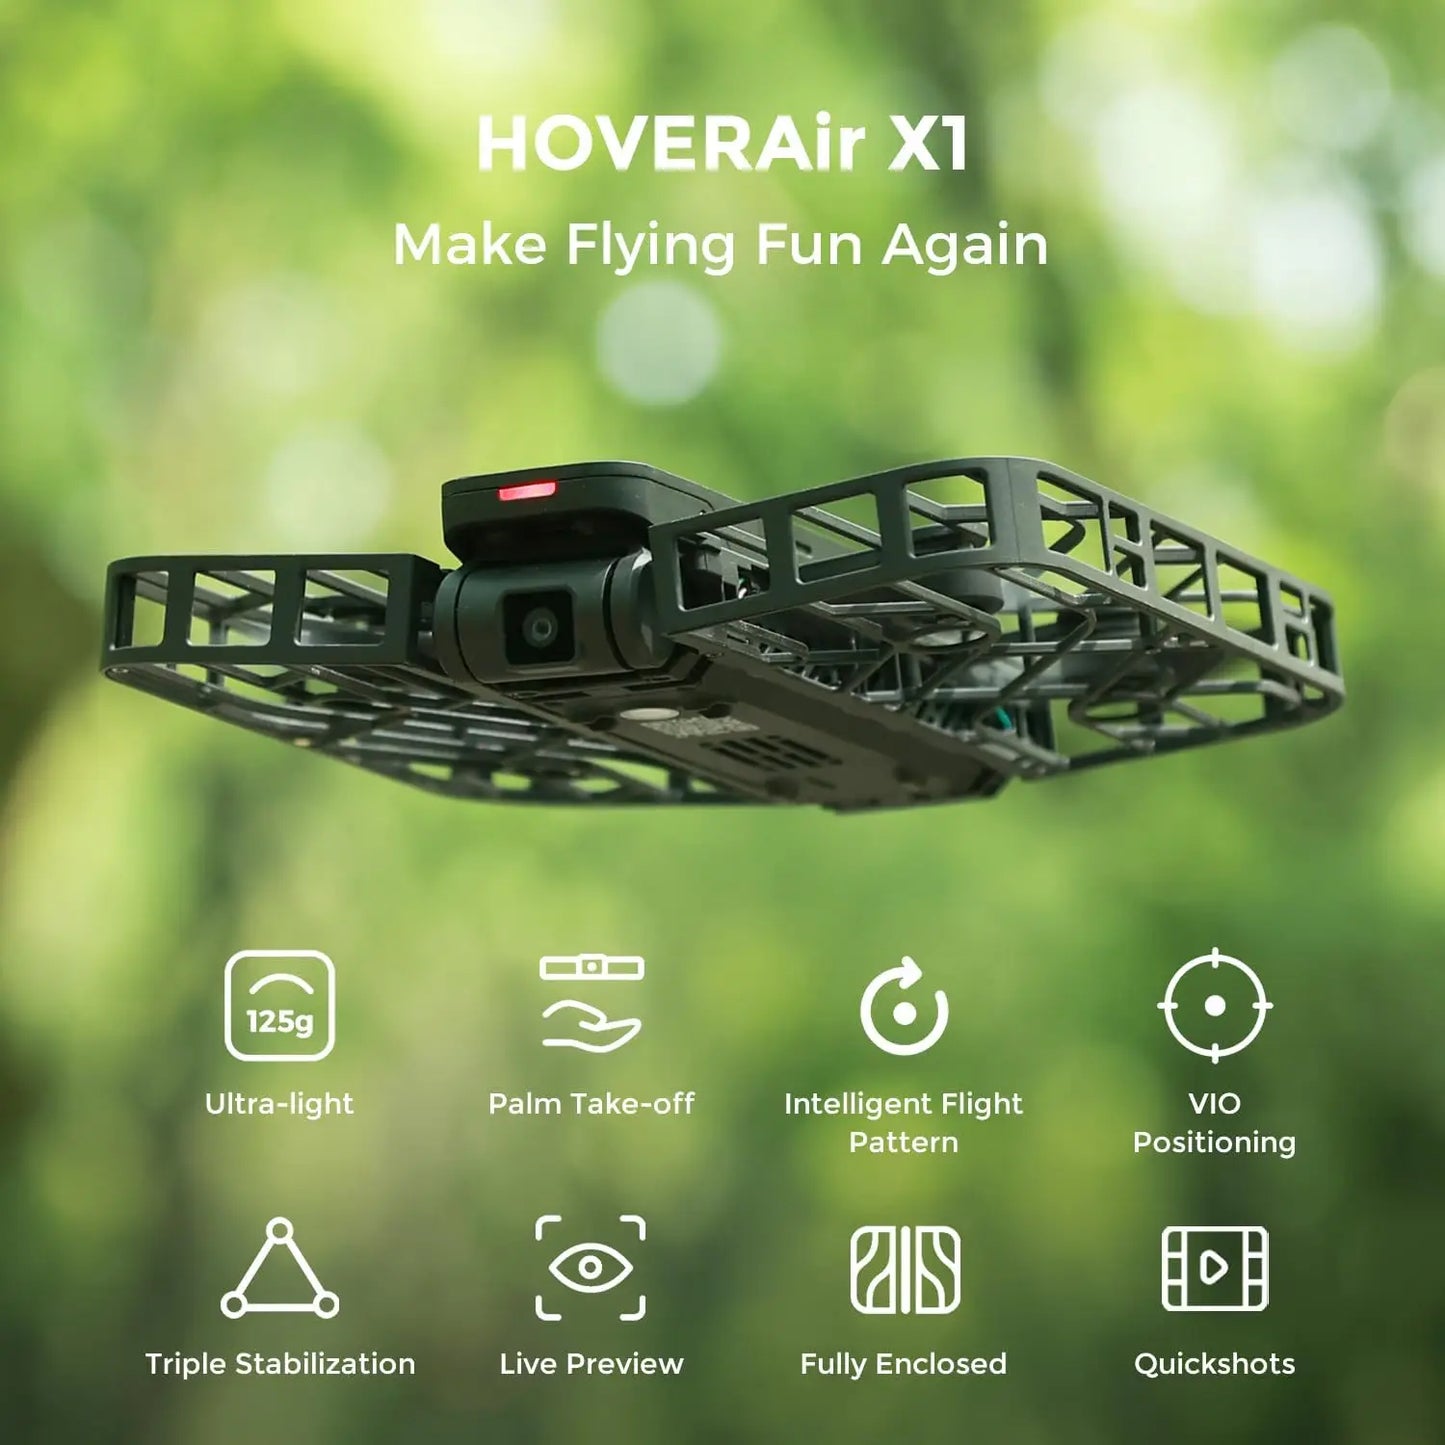 HOVER Air X1 Drone Self Flying Camera Pocket Sized Drone HDR Video Capture Palm Takeoff Intelligent Flight Paths HOVERAir X1